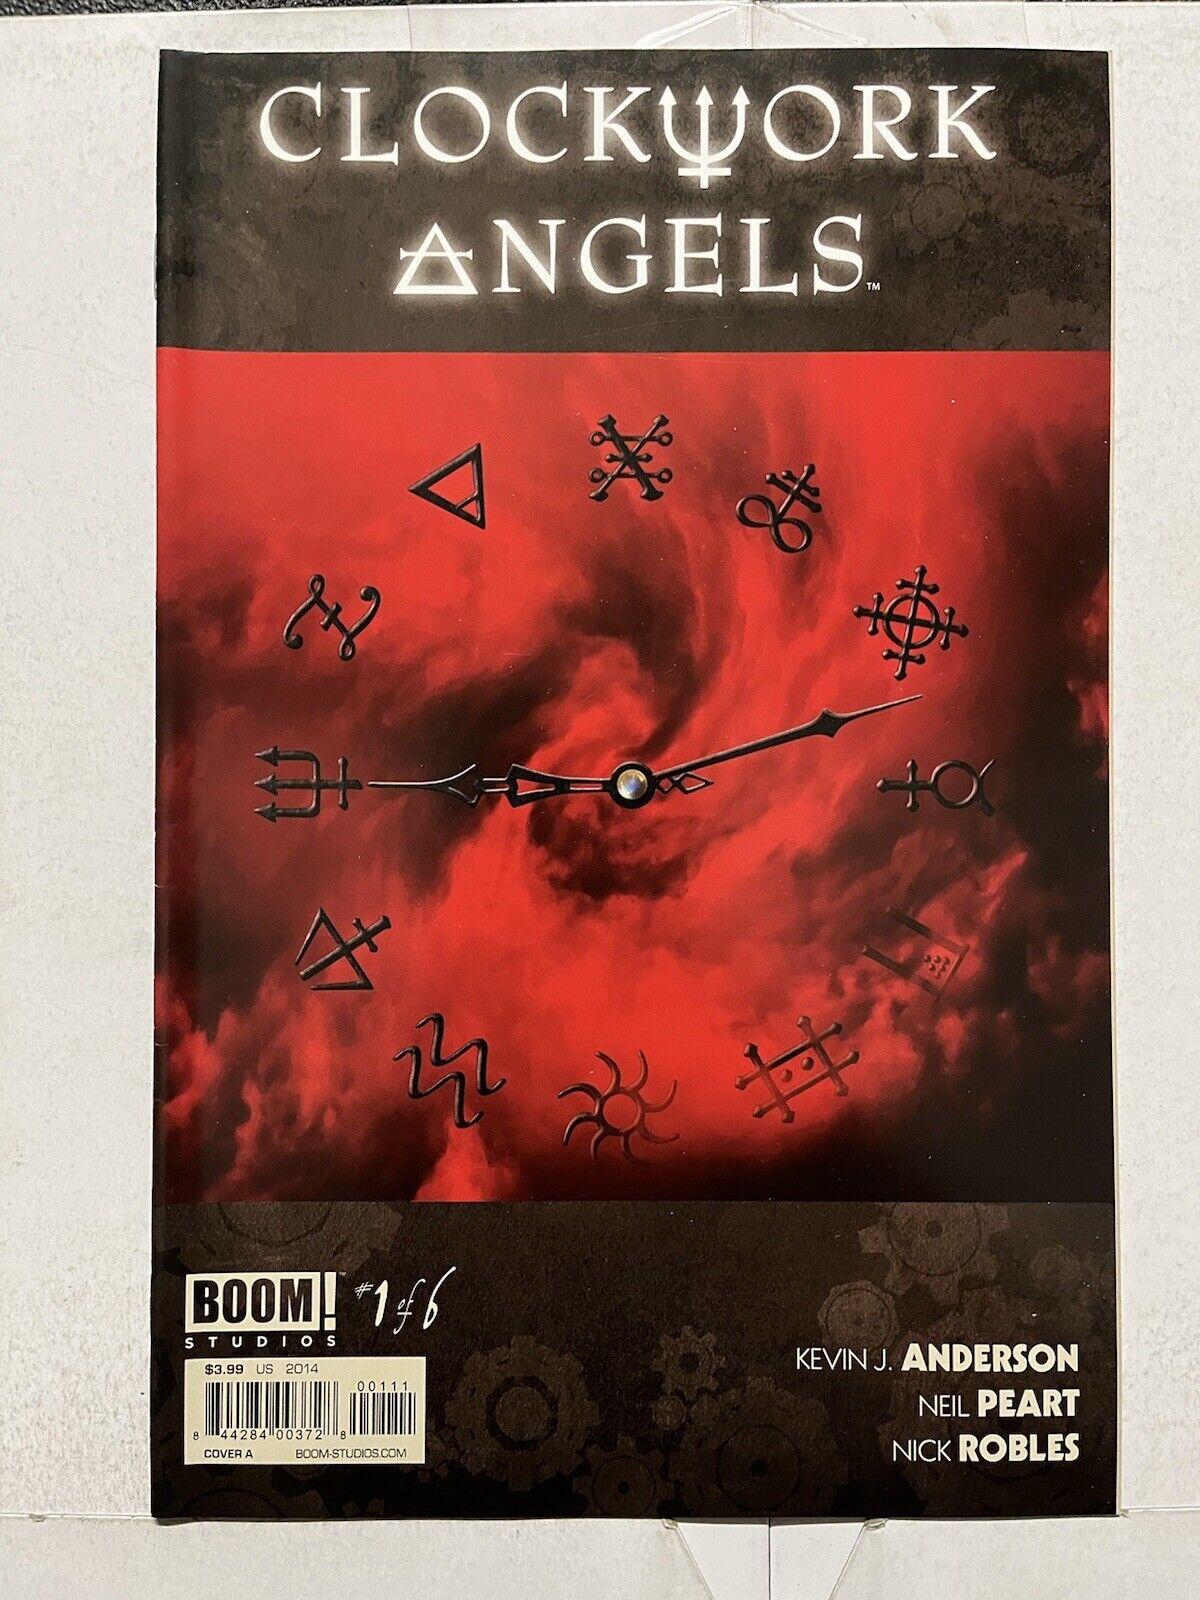 CLOCKWORK ANGELS 1 BOOM COMIC NEIL PEART RUSH MUSIC ANDERSON ROBLES 2014 NM